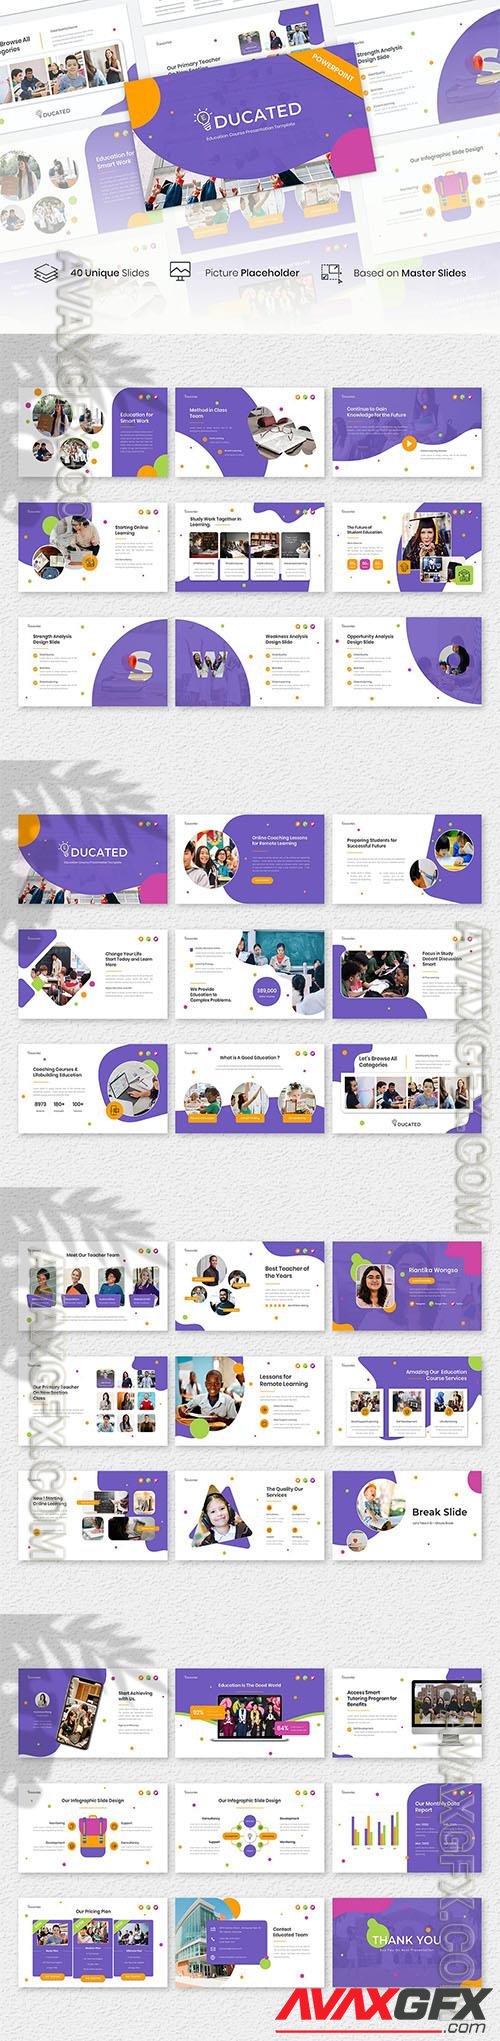 Educated – Education Course Presentation Template DXDUY7N